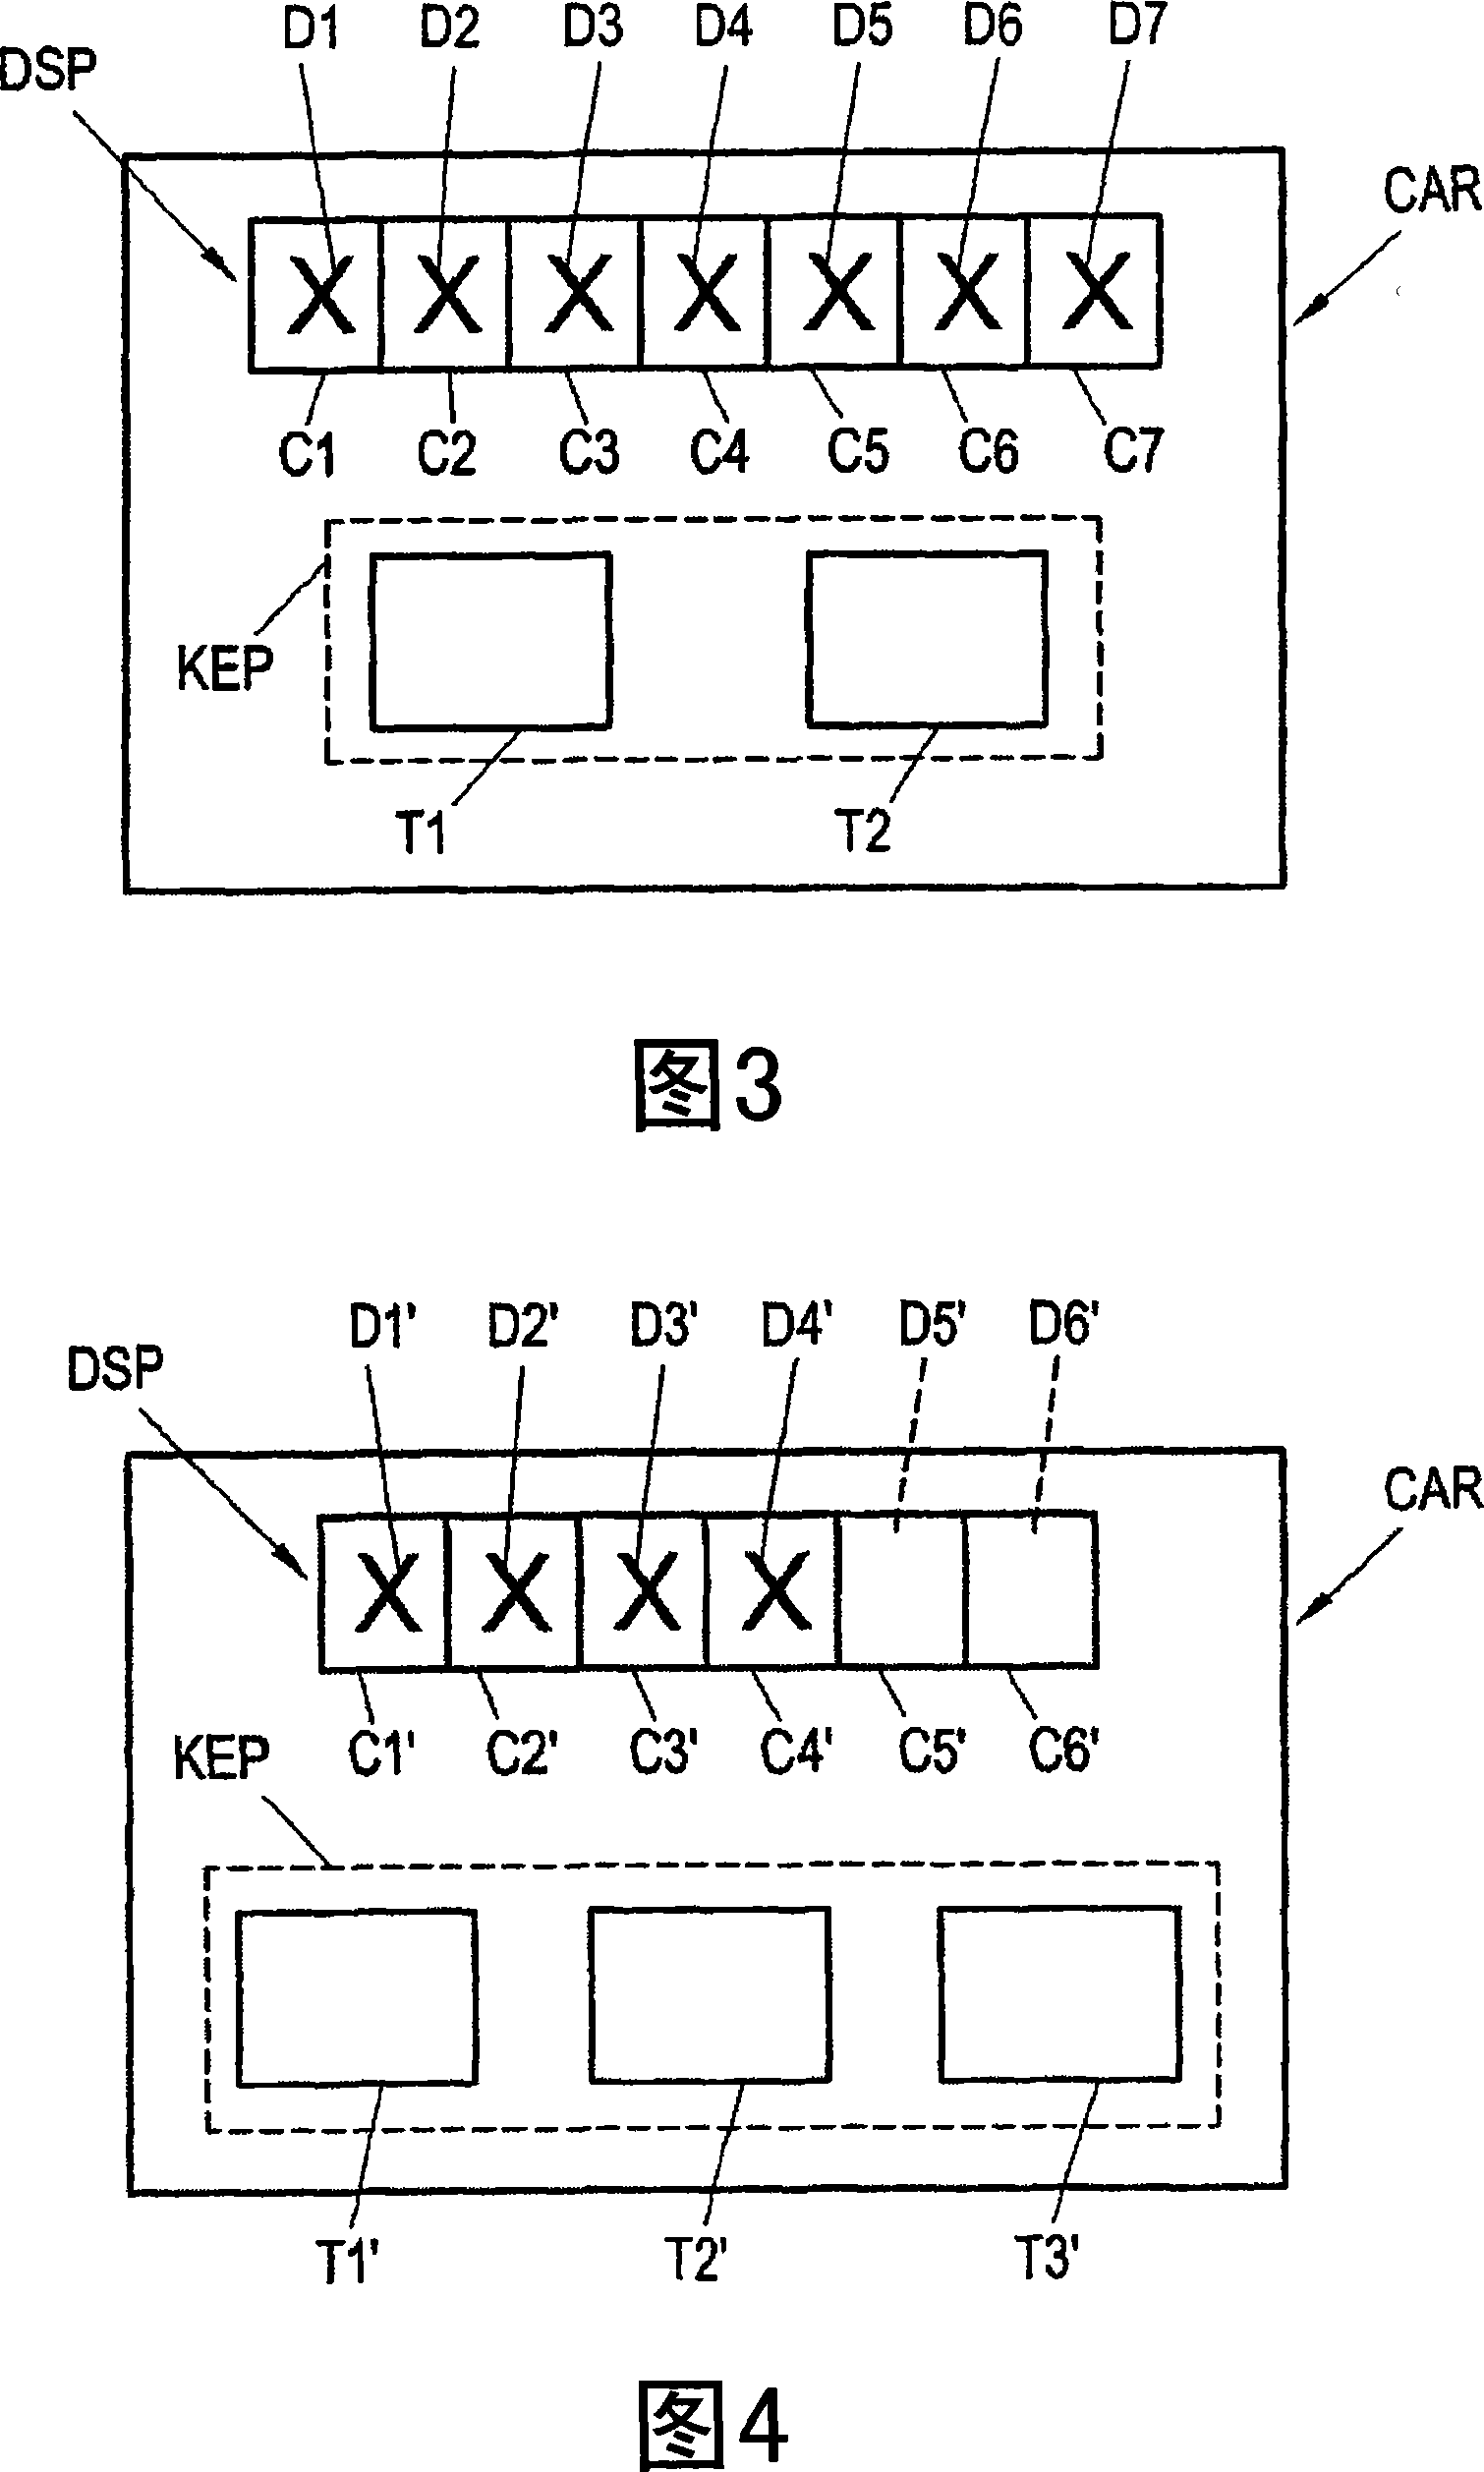 Card with input elements for entering a PIN code and method of entering a PIN code